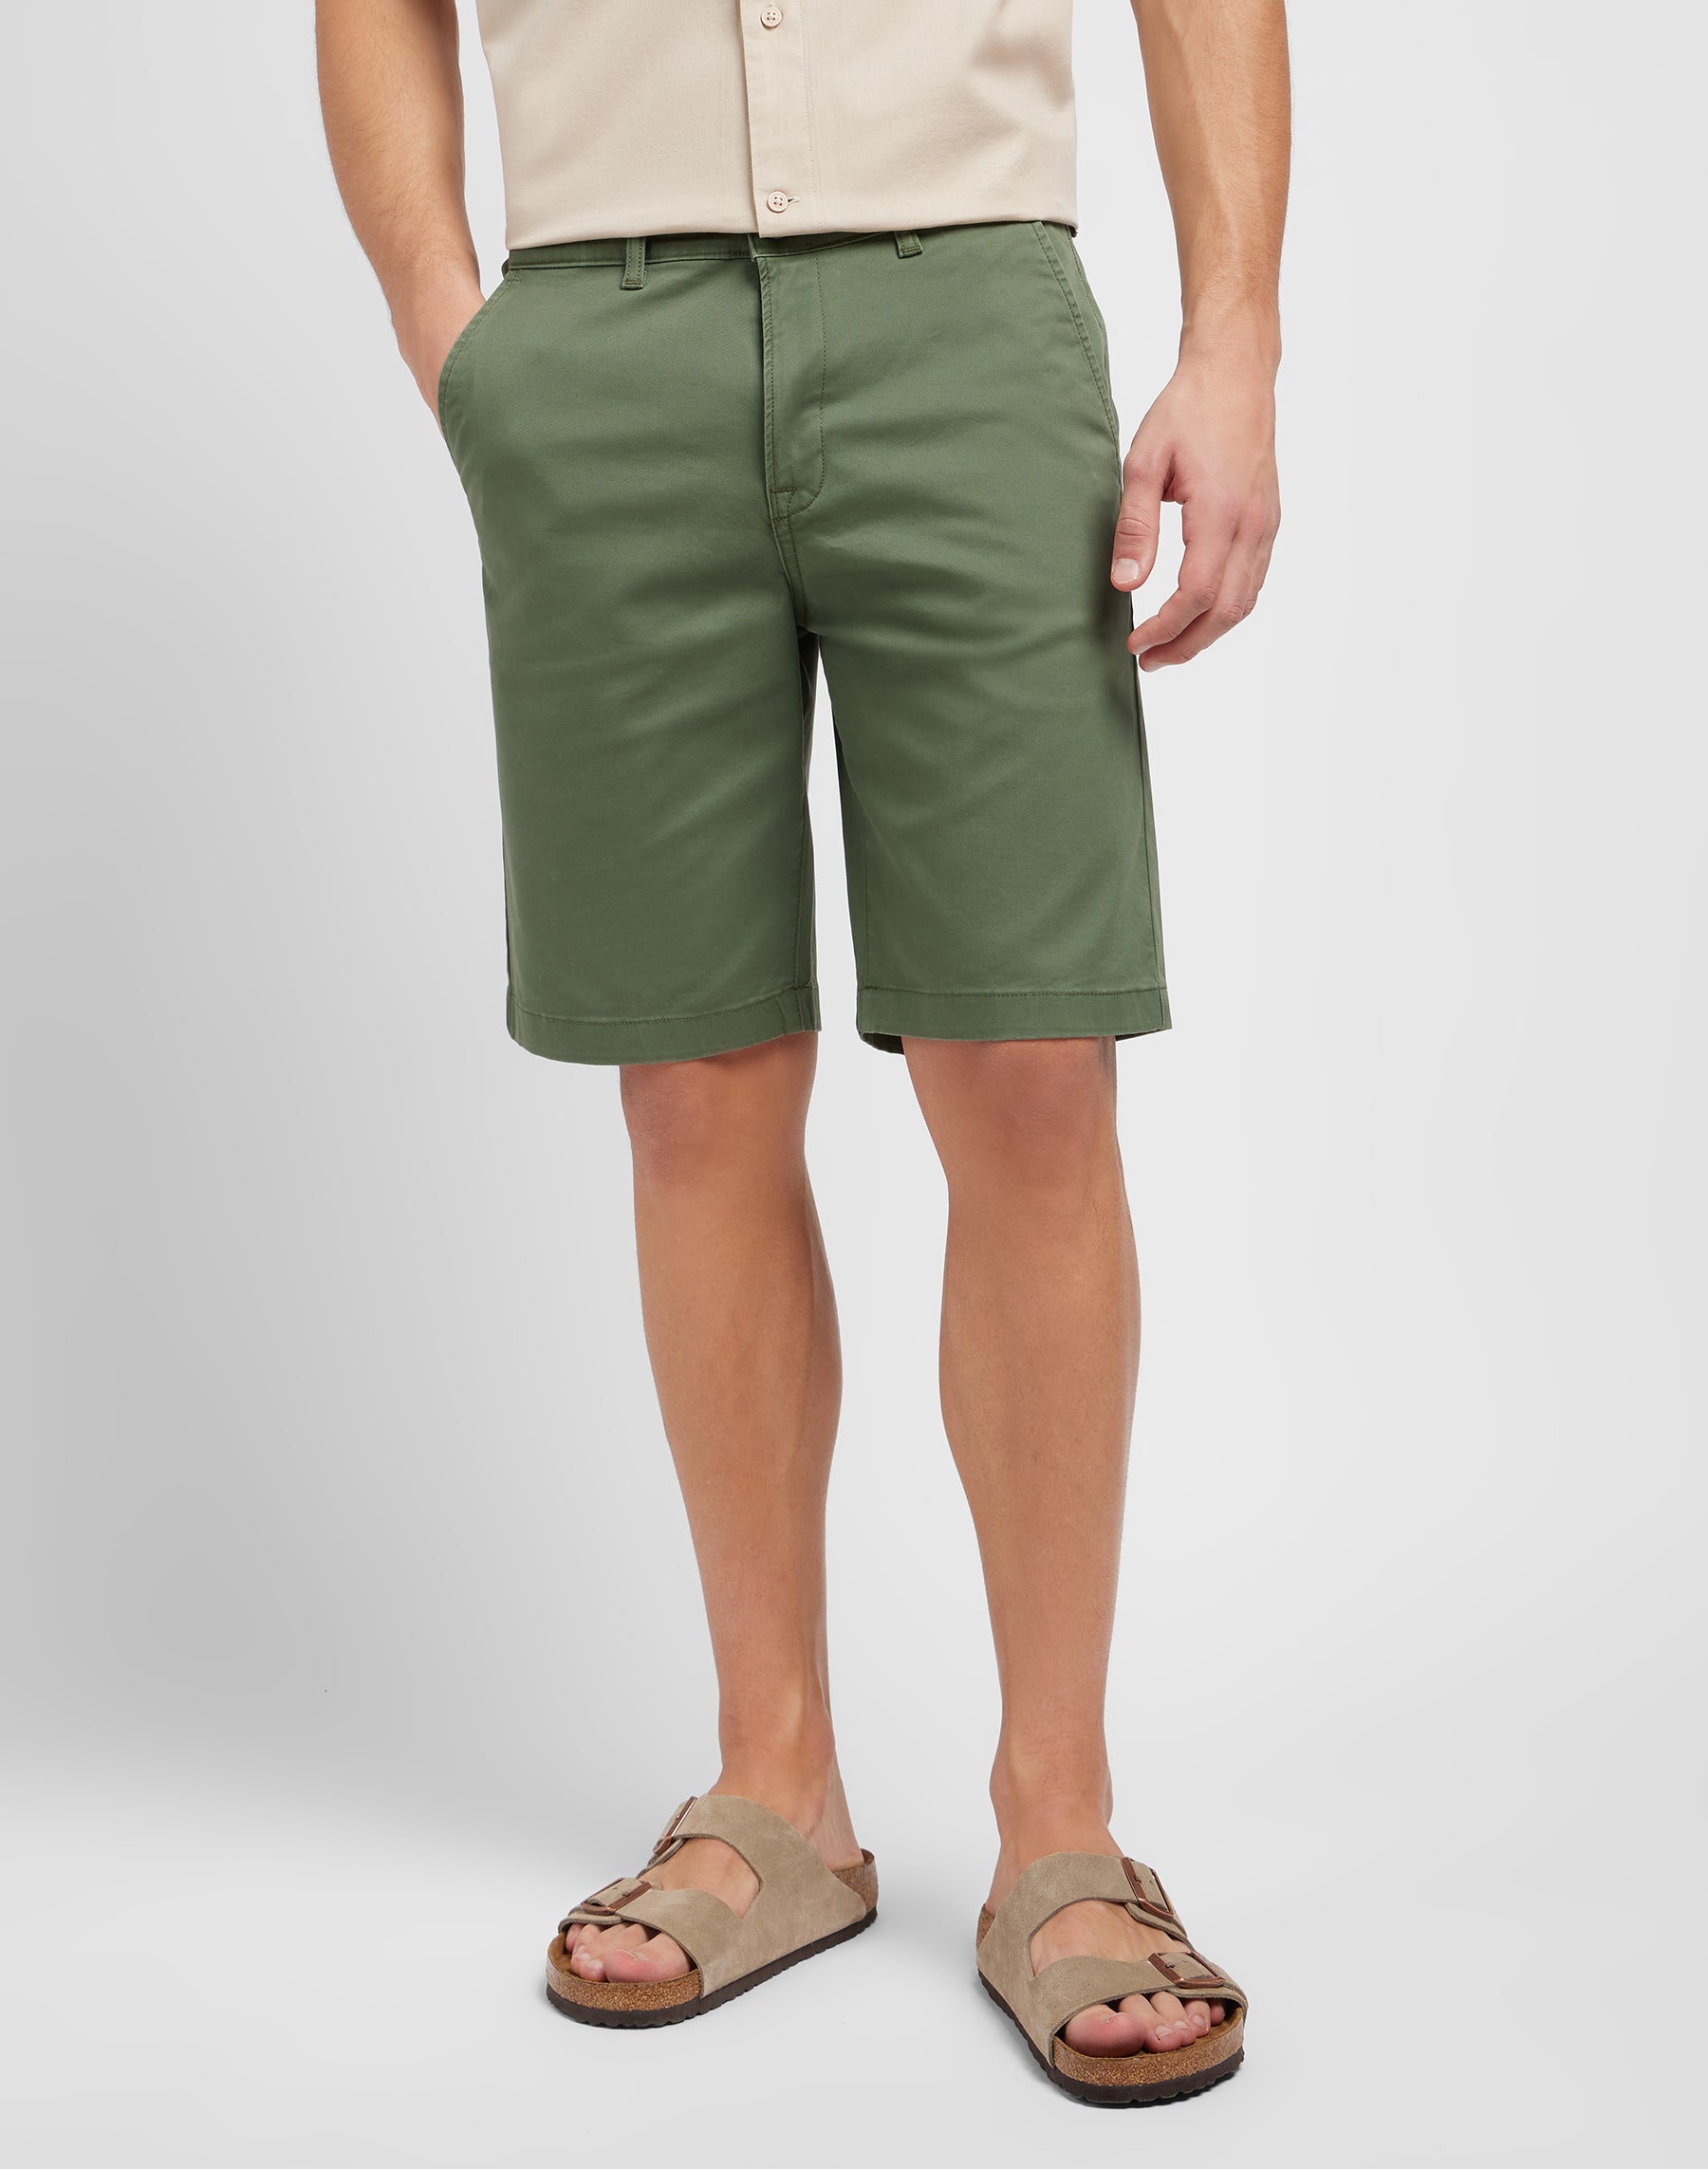 Regular Chino Short in Olive Grove Shorts Lee   